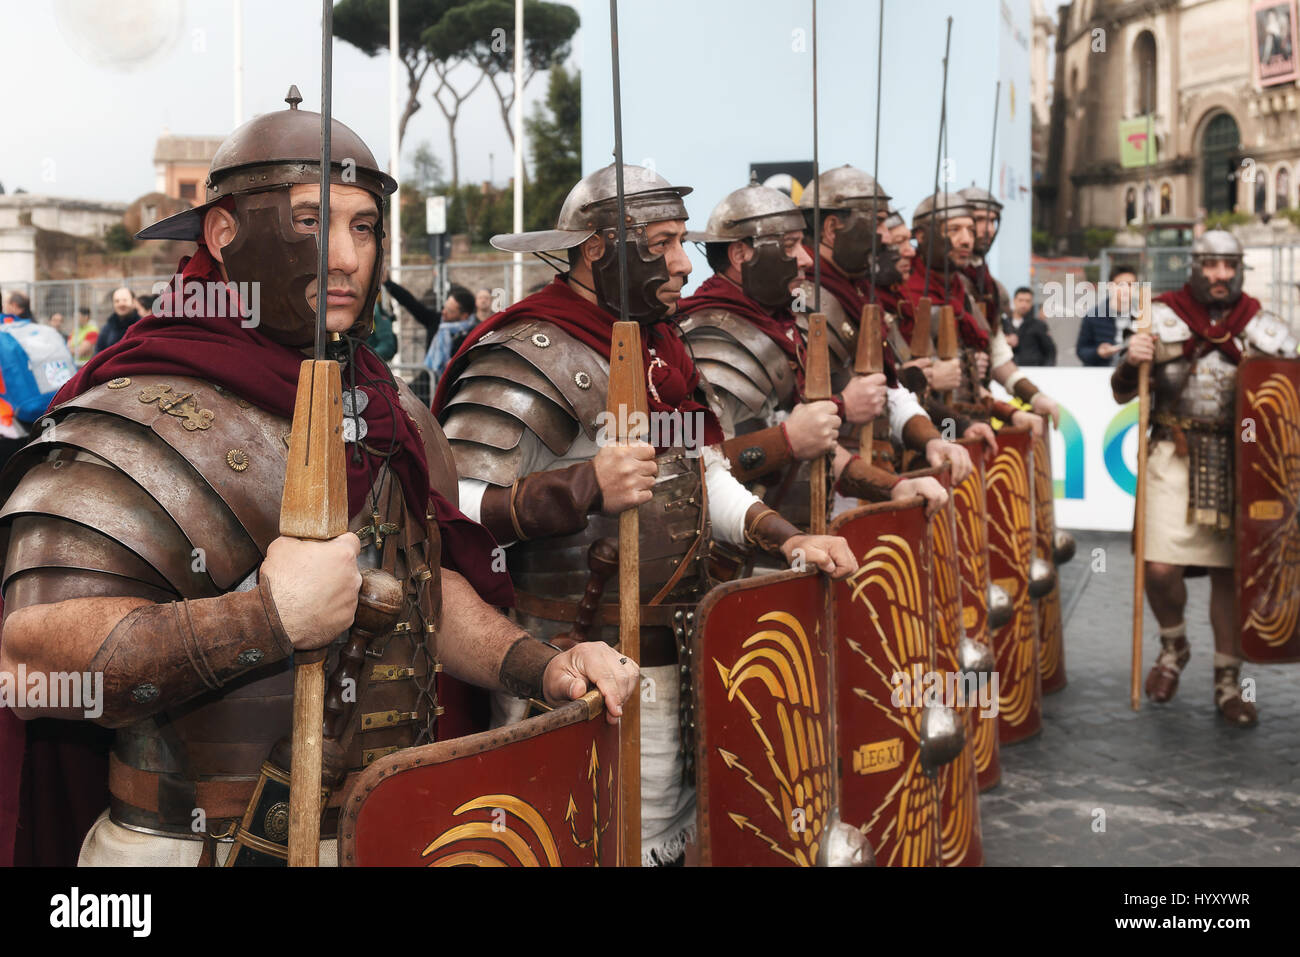 Rome, Italy - April 2nd, 2017: Gladiators in line with the typical clothing, helmet and spear. They await the start of the marathon. Stock Photo